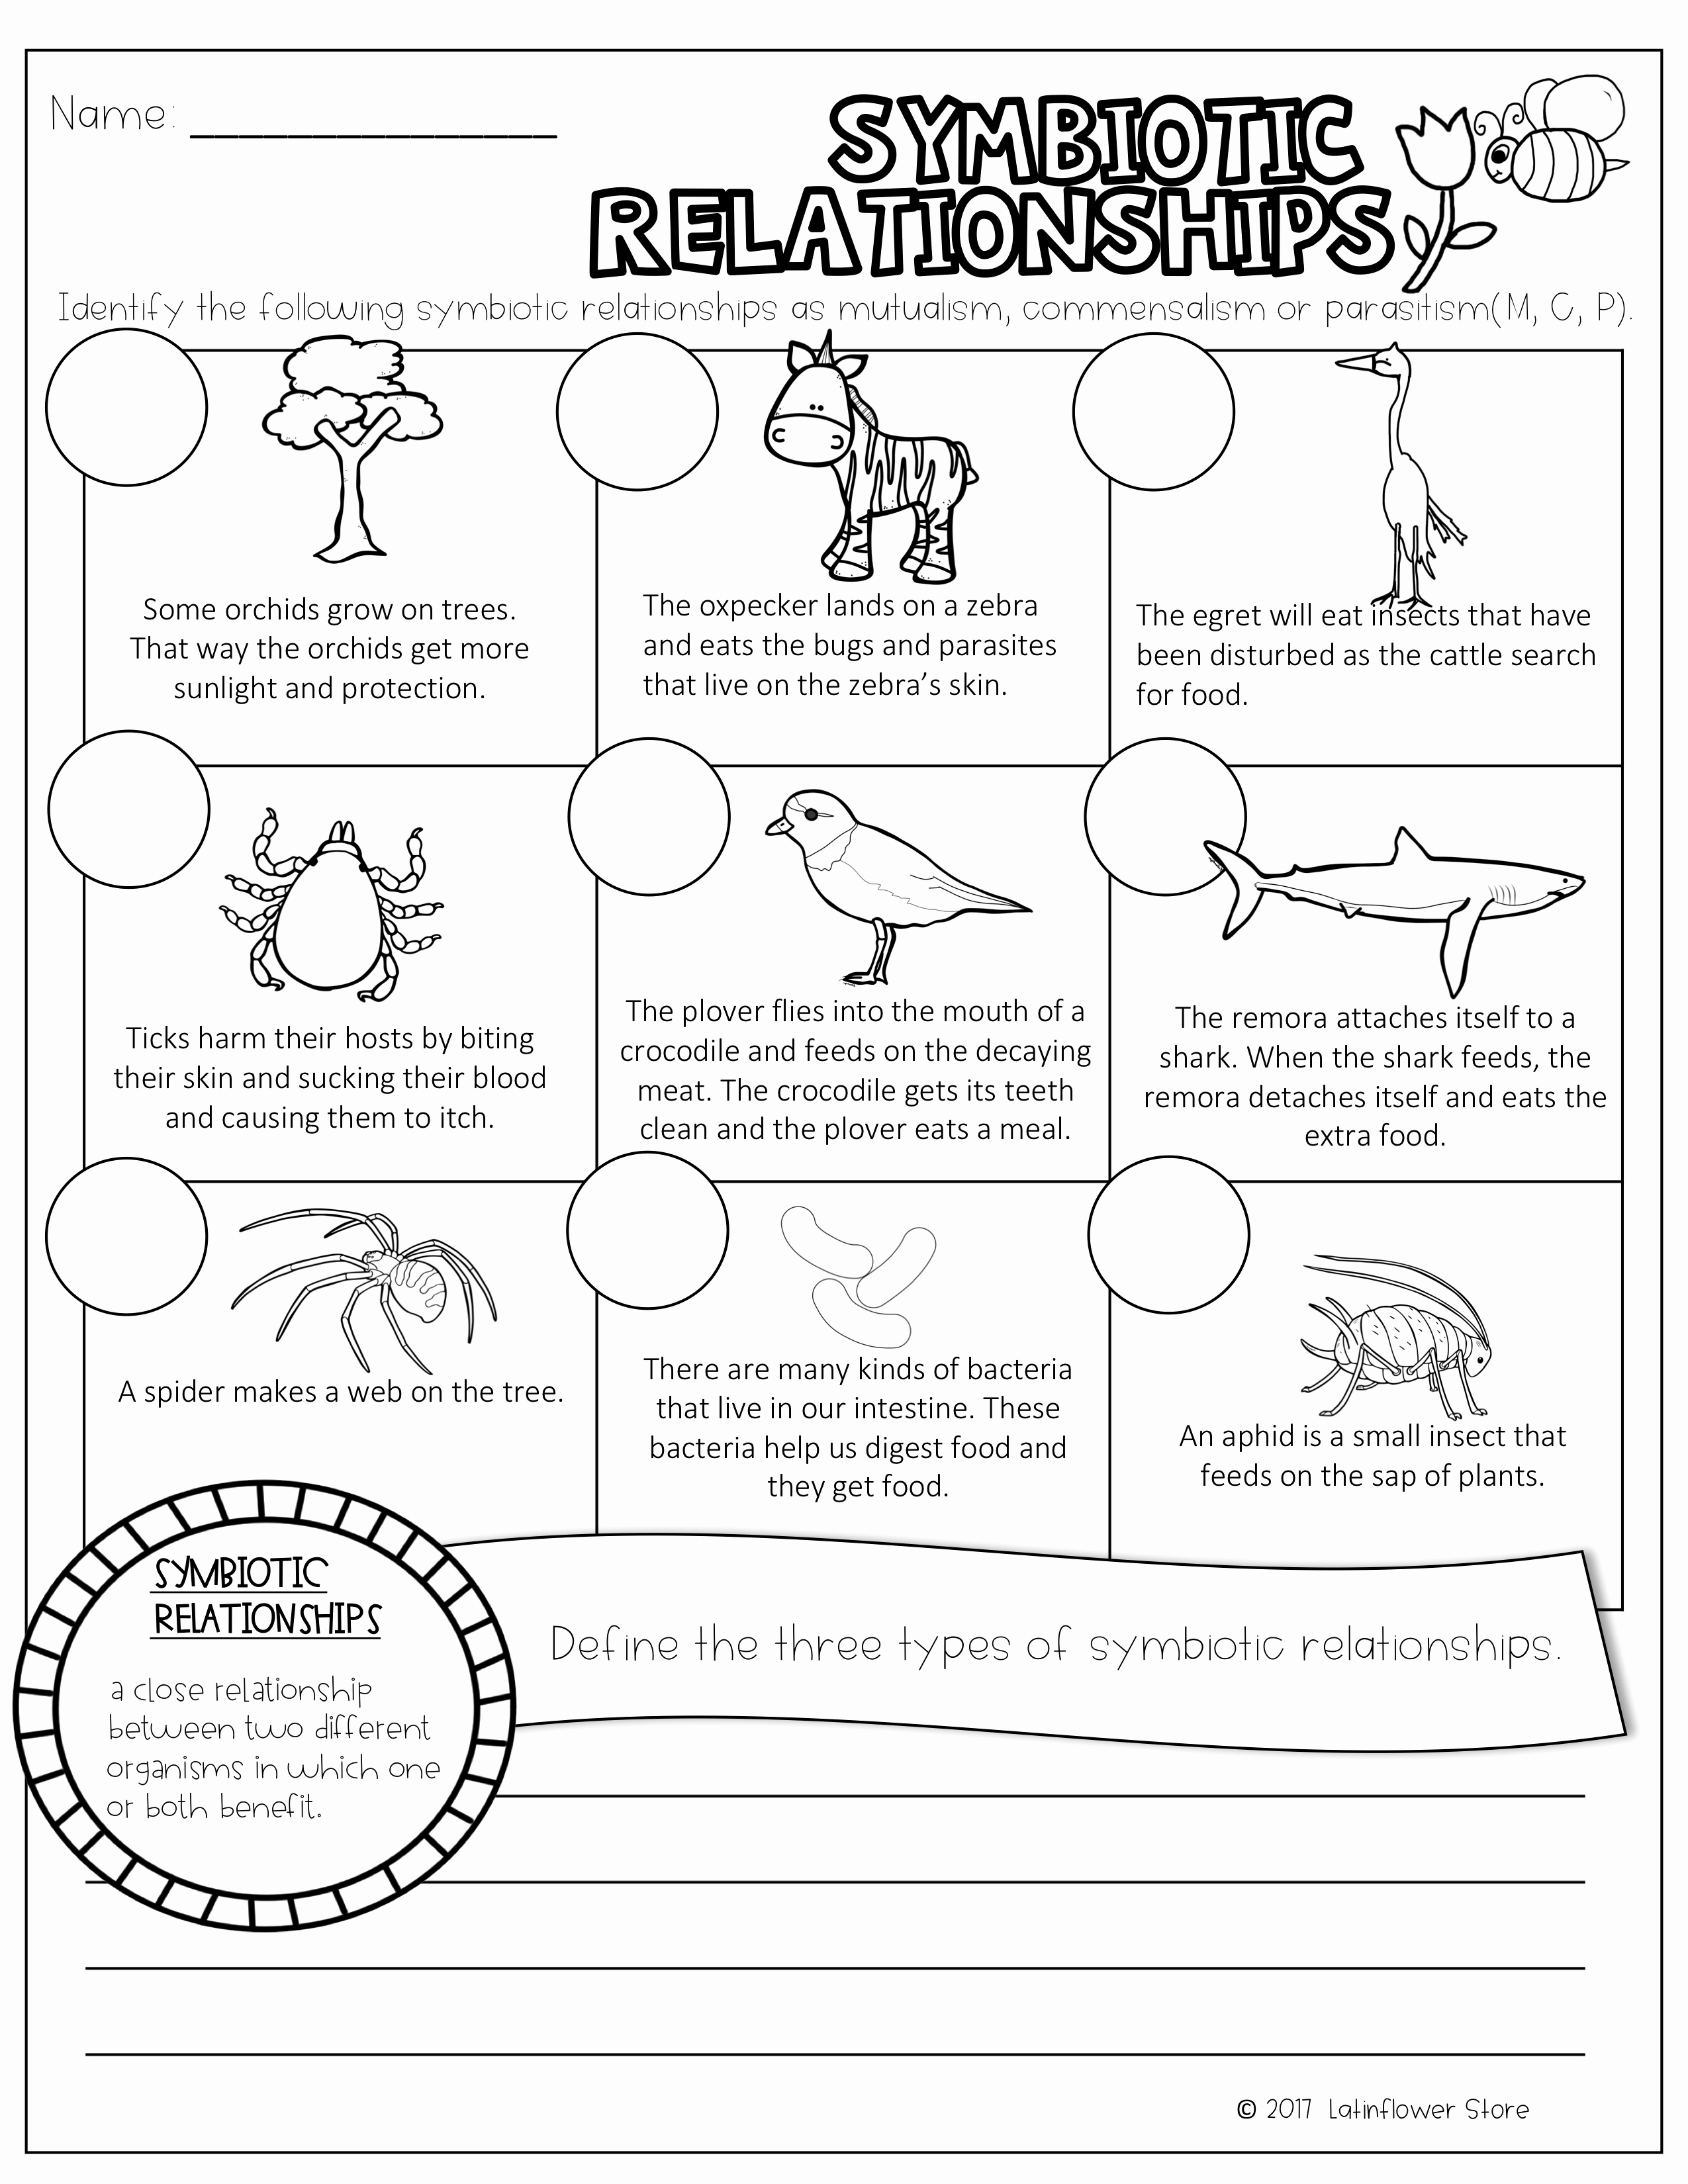 Symbiotic Relationships Worksheet Answers Inspirational Symbiotic Relationships English and Spanish Versions